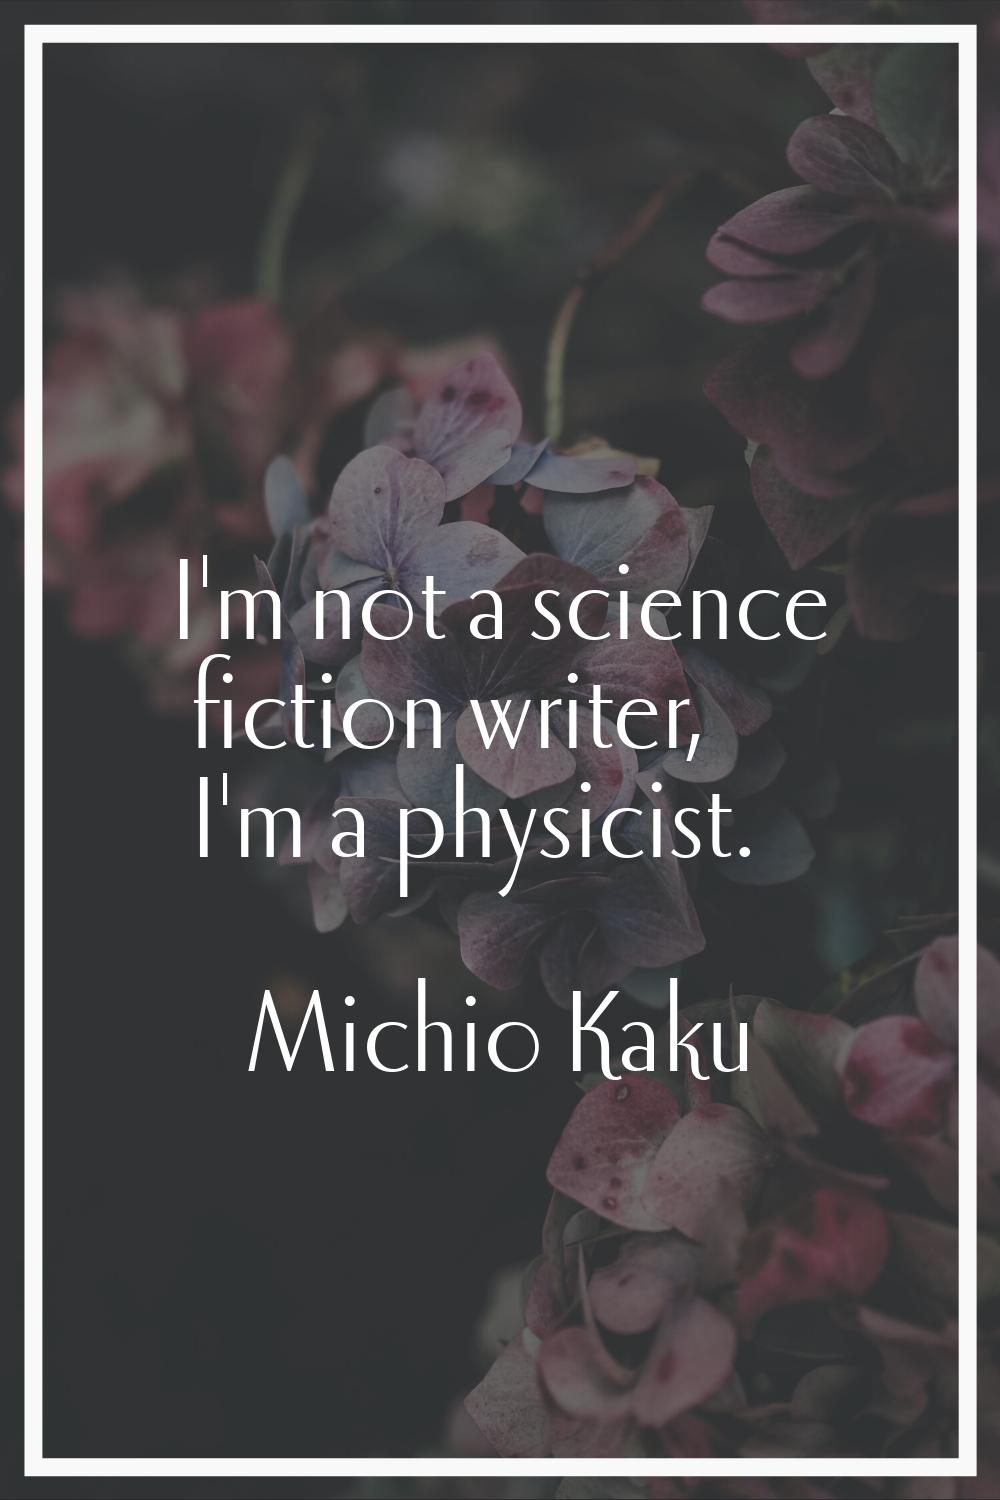 I'm not a science fiction writer, I'm a physicist.